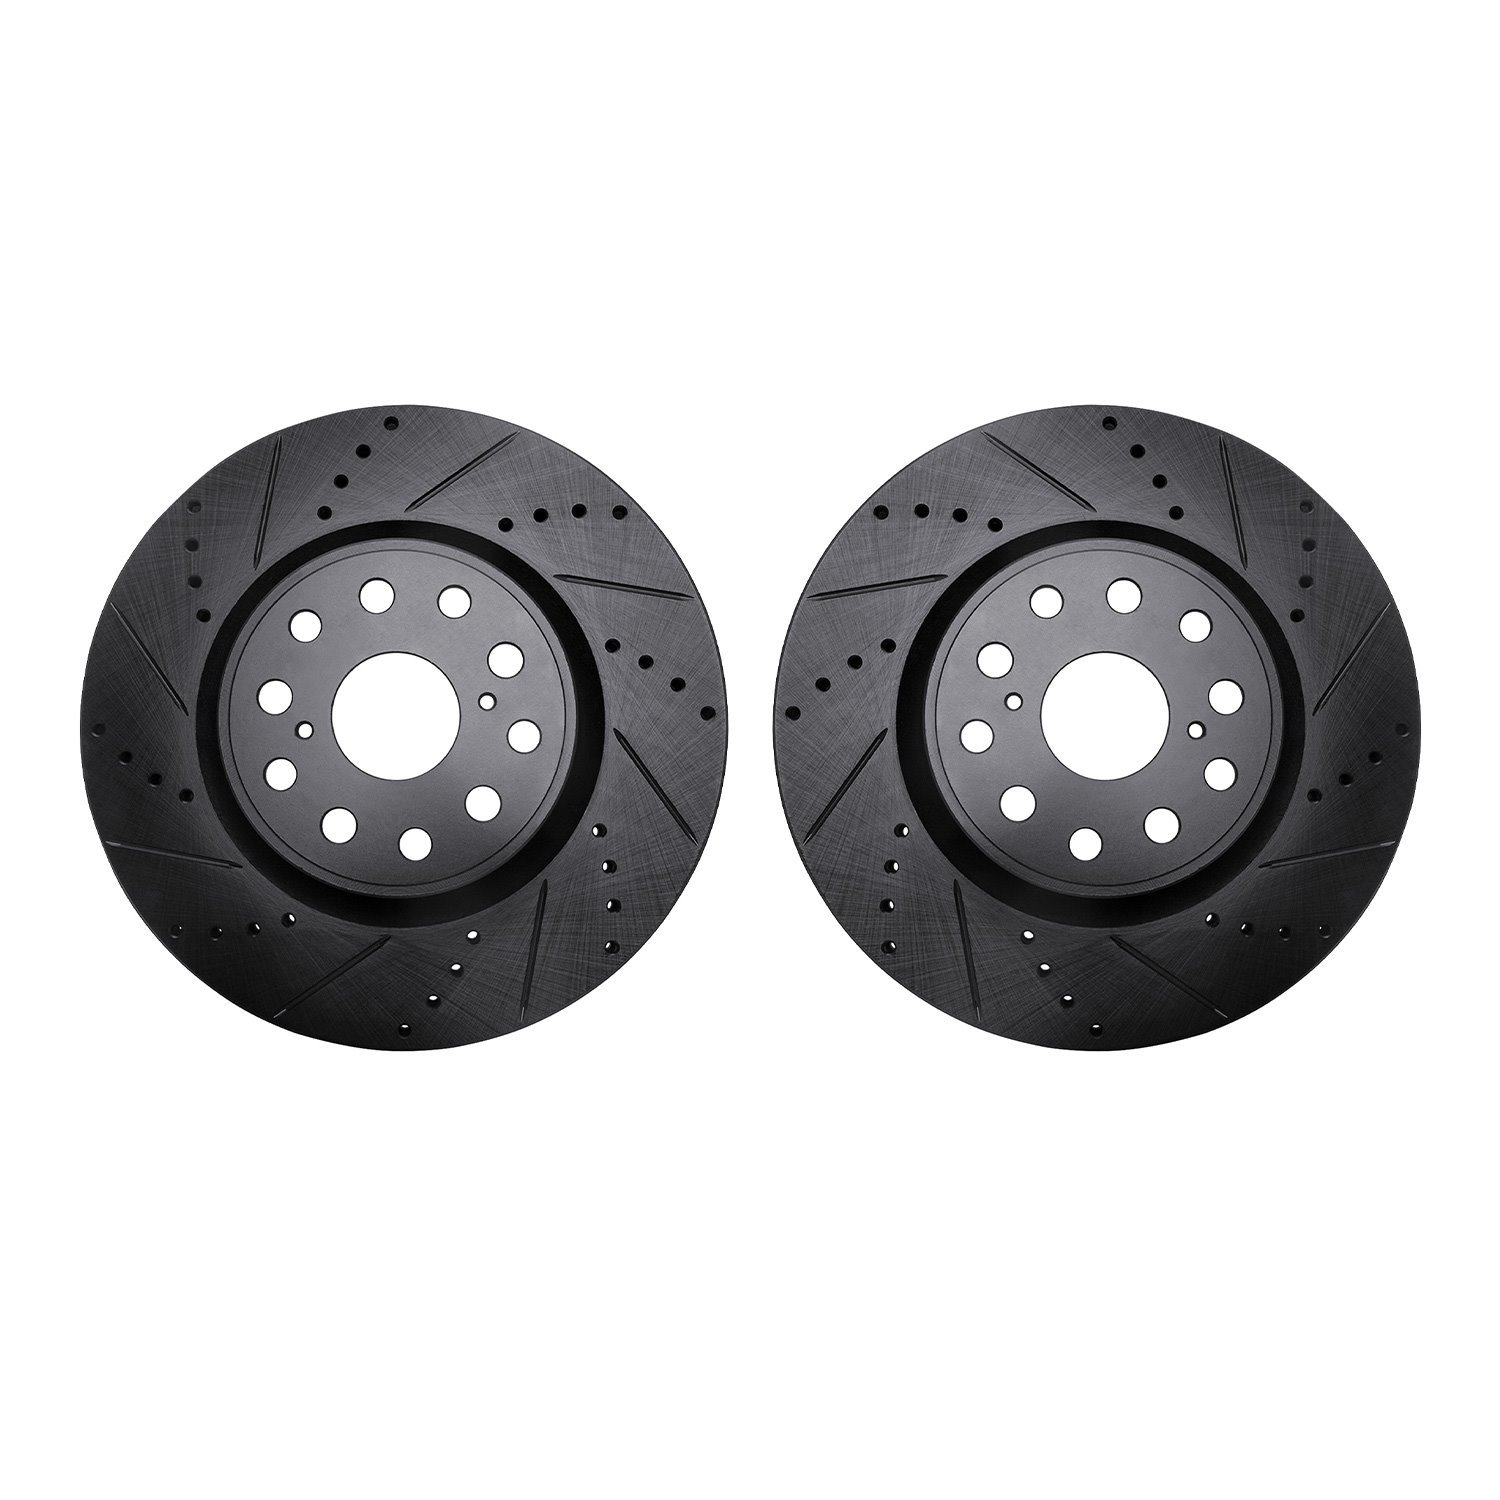 8002-75016 Drilled/Slotted Brake Rotors [Black], Fits Select Lexus/Toyota/Scion, Position: Front